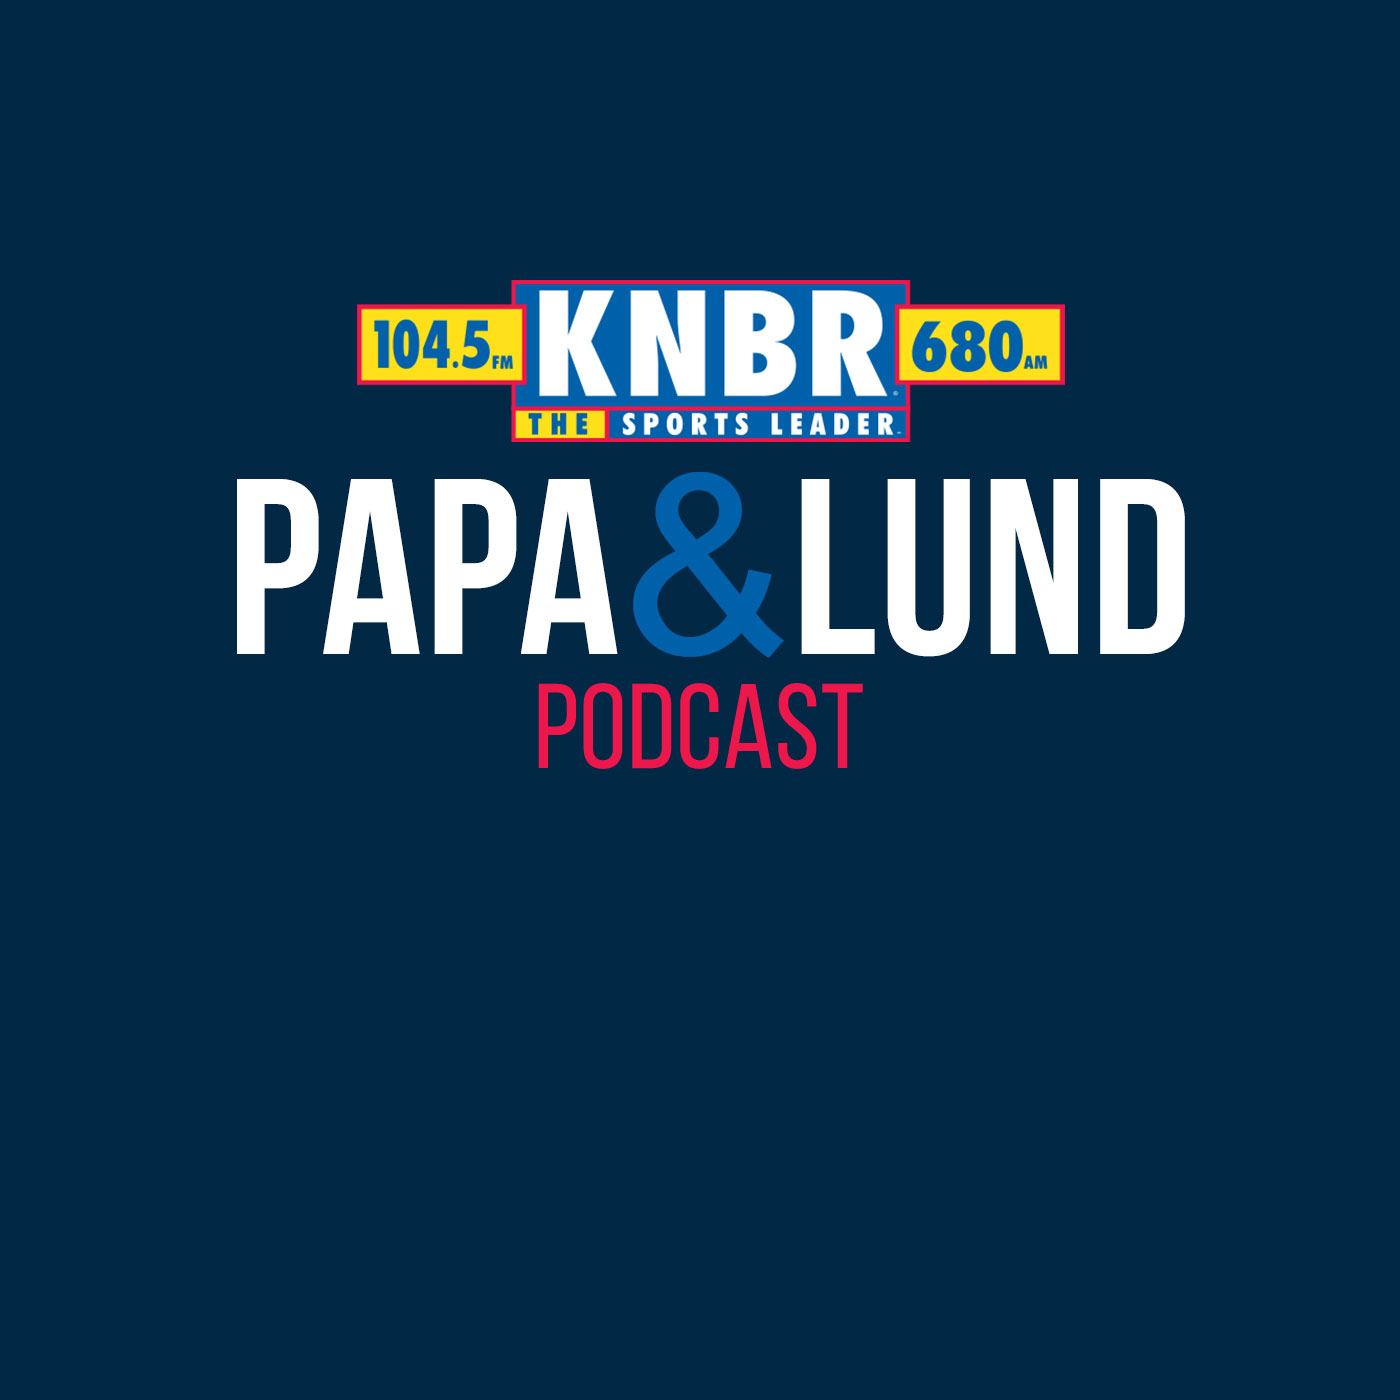 1-30 Donte Whitner joins Papa & Lund to discuss the frustrating loss for the 49ers in Philly and what the 49ers need to do to get over the hump